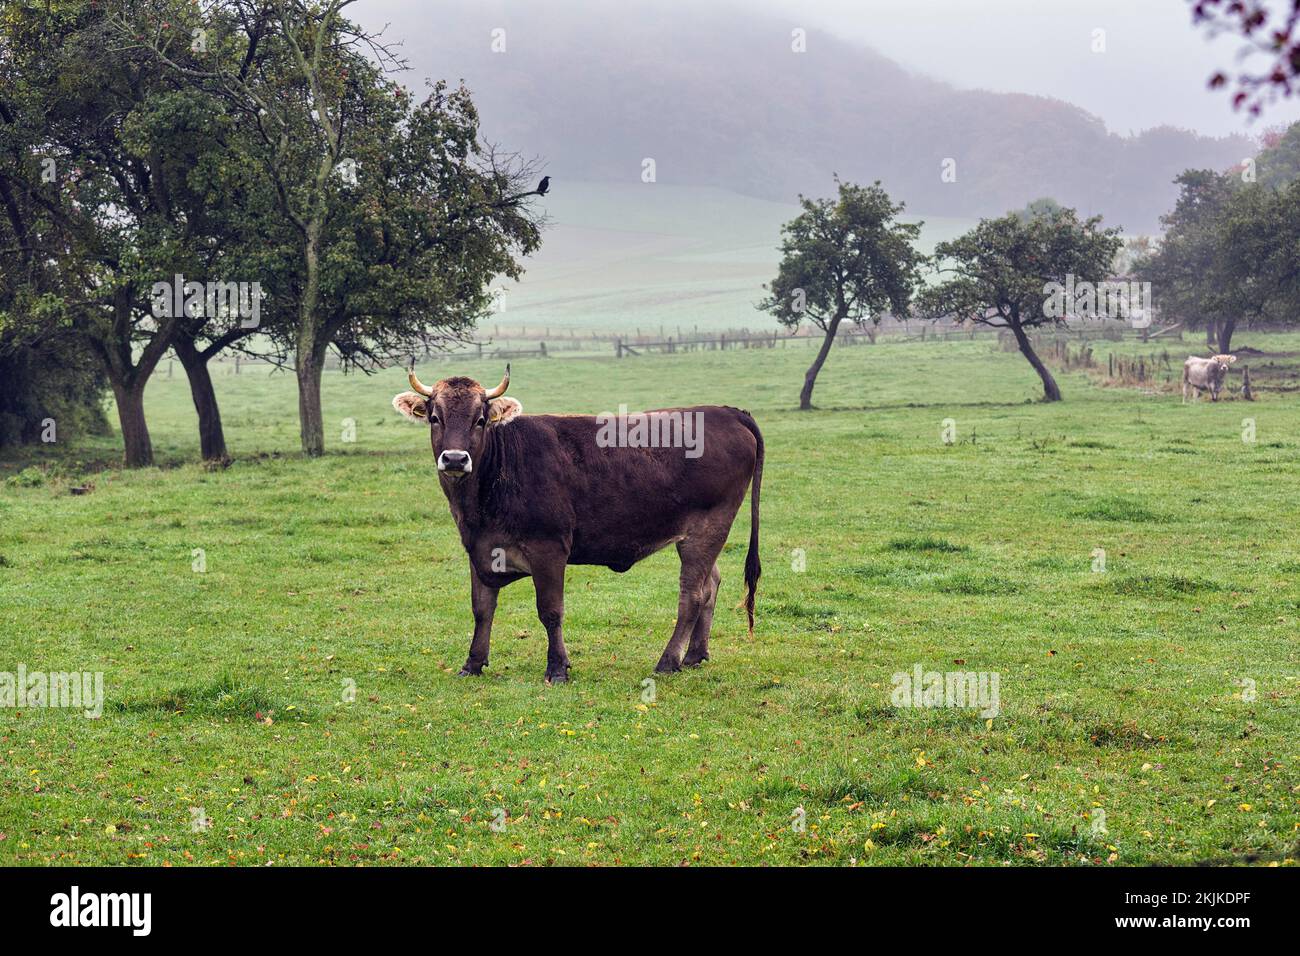 Meadow with fruit trees and cow, dreary autumn weather with fog, Lügde, Weserbergland, North Rhine-Westphalia, Germany, Europe Stock Photo